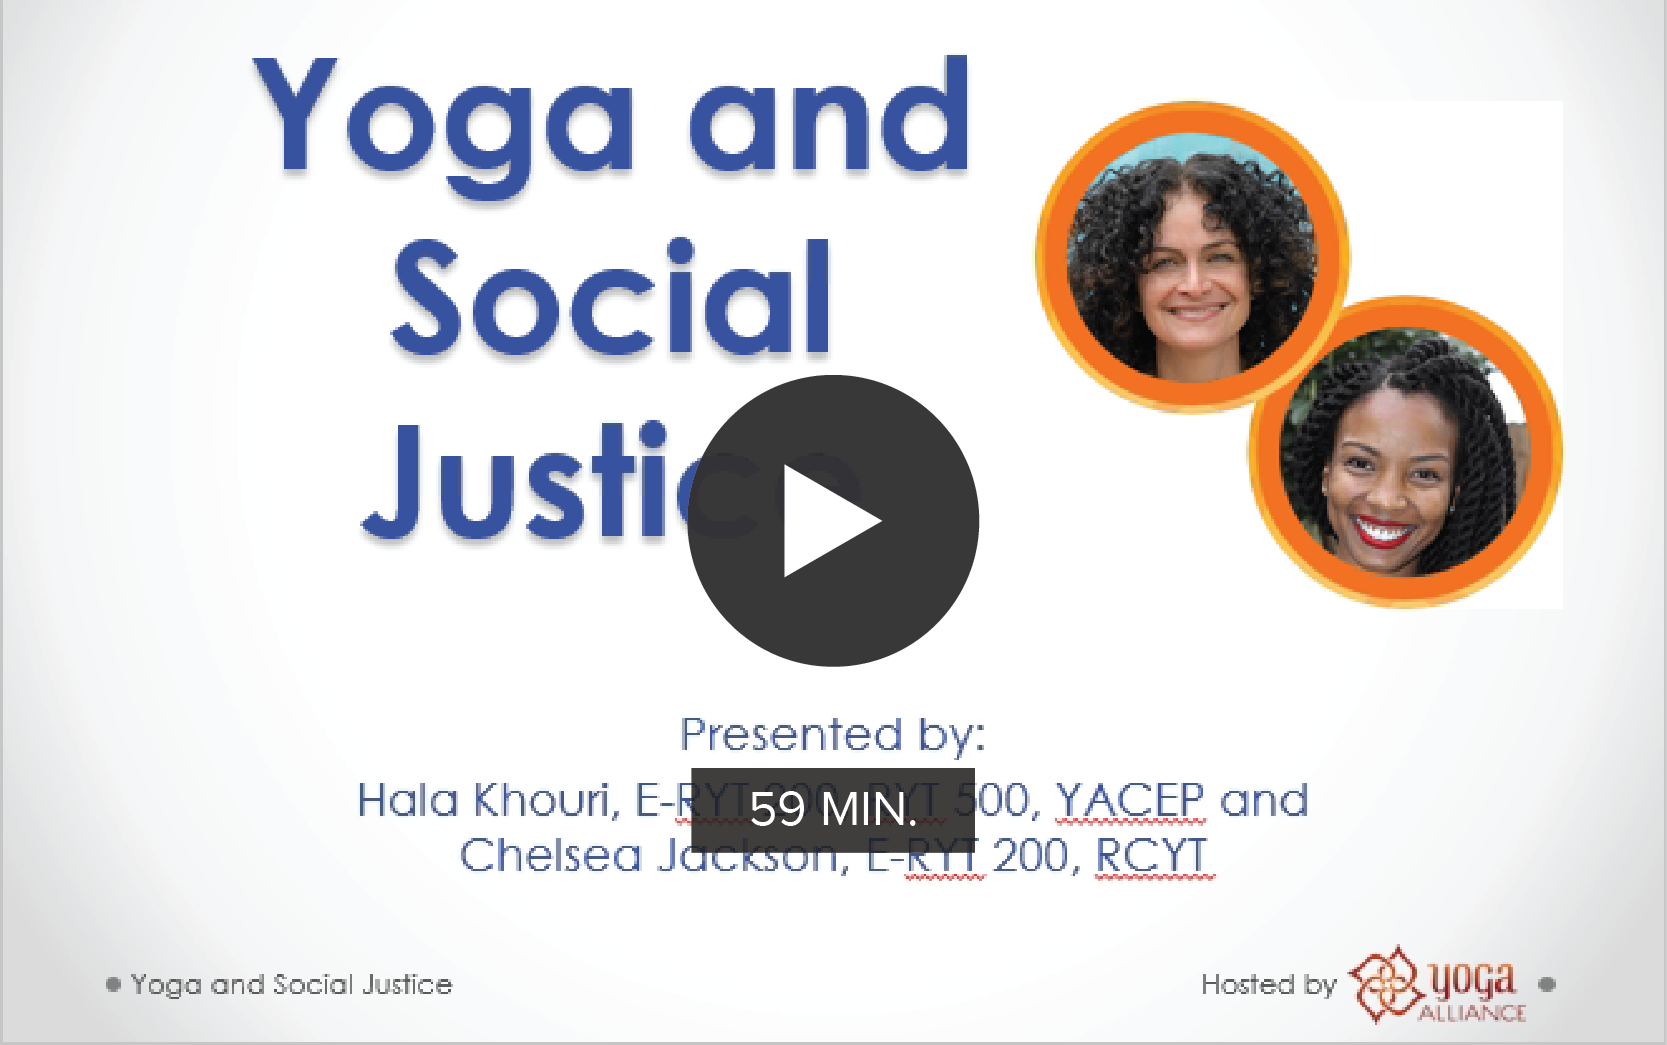 Yoga and Social Justice